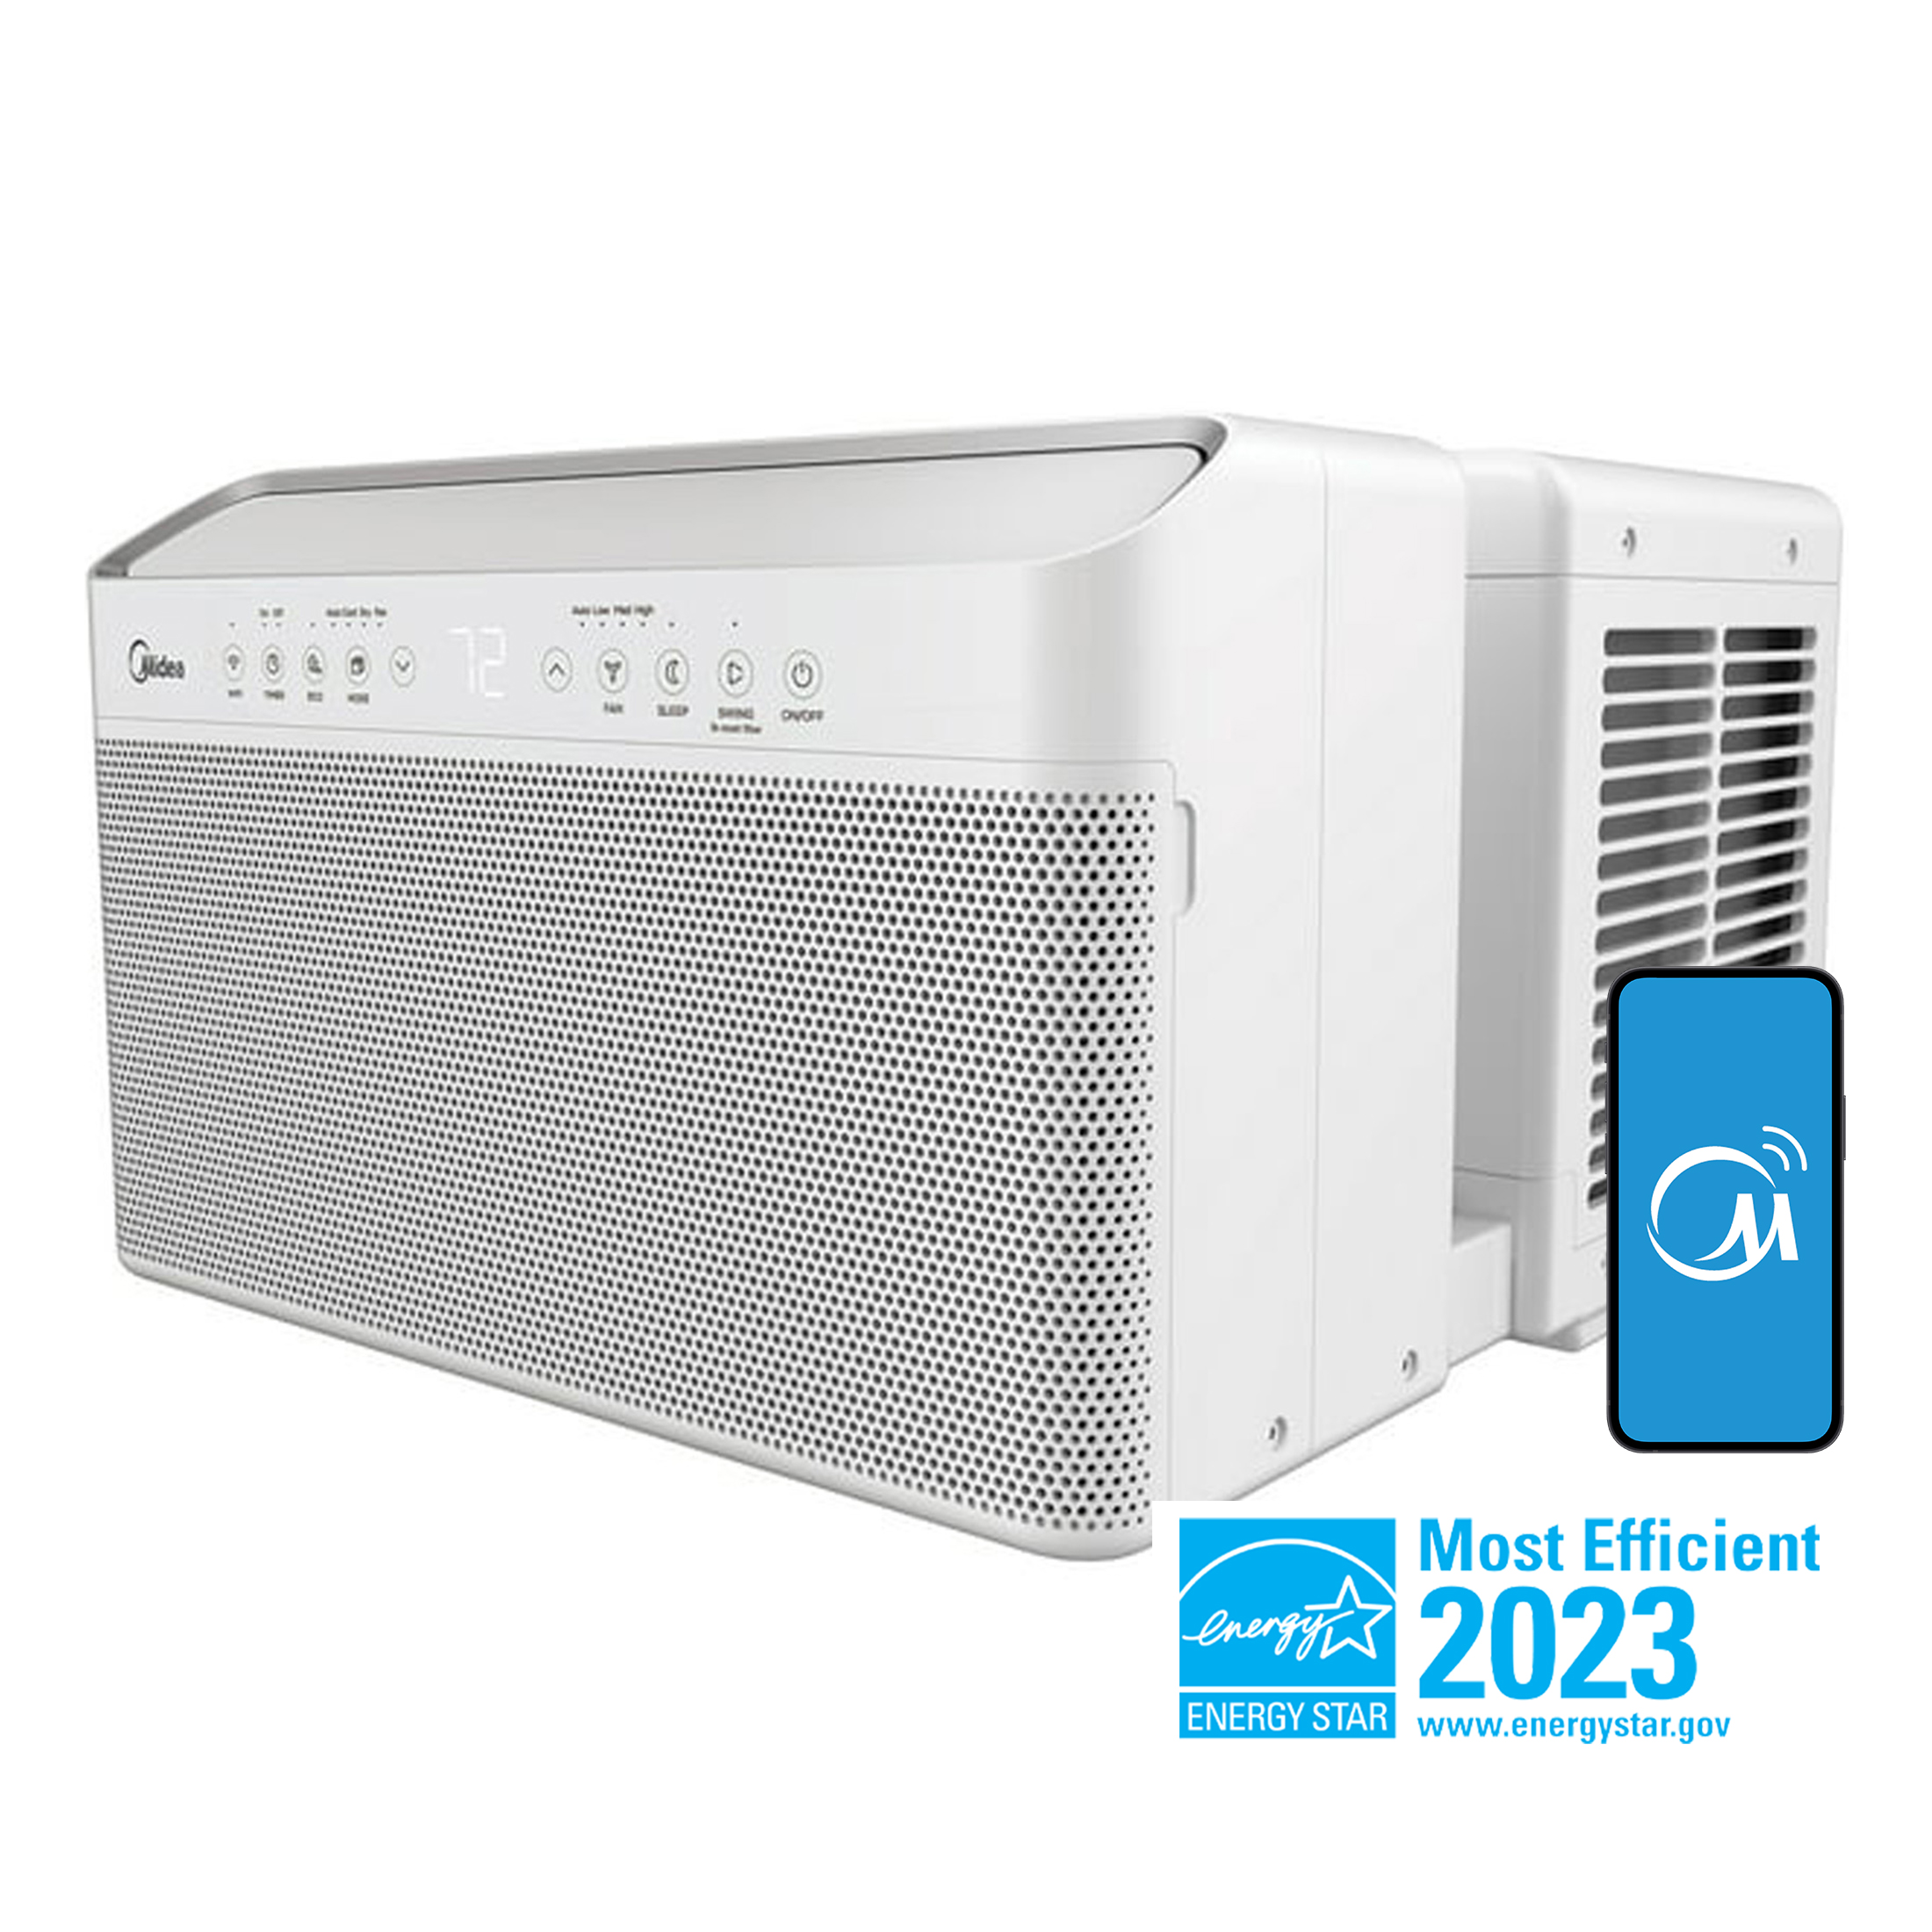 Midea 12,000 BTU Smart Inverter U-Shaped Window Air Conditioner, 35% Energy Savings, Extreme Quiet, Covers up to 550 Sq. ft., MAW12V1QWT - image 1 of 18